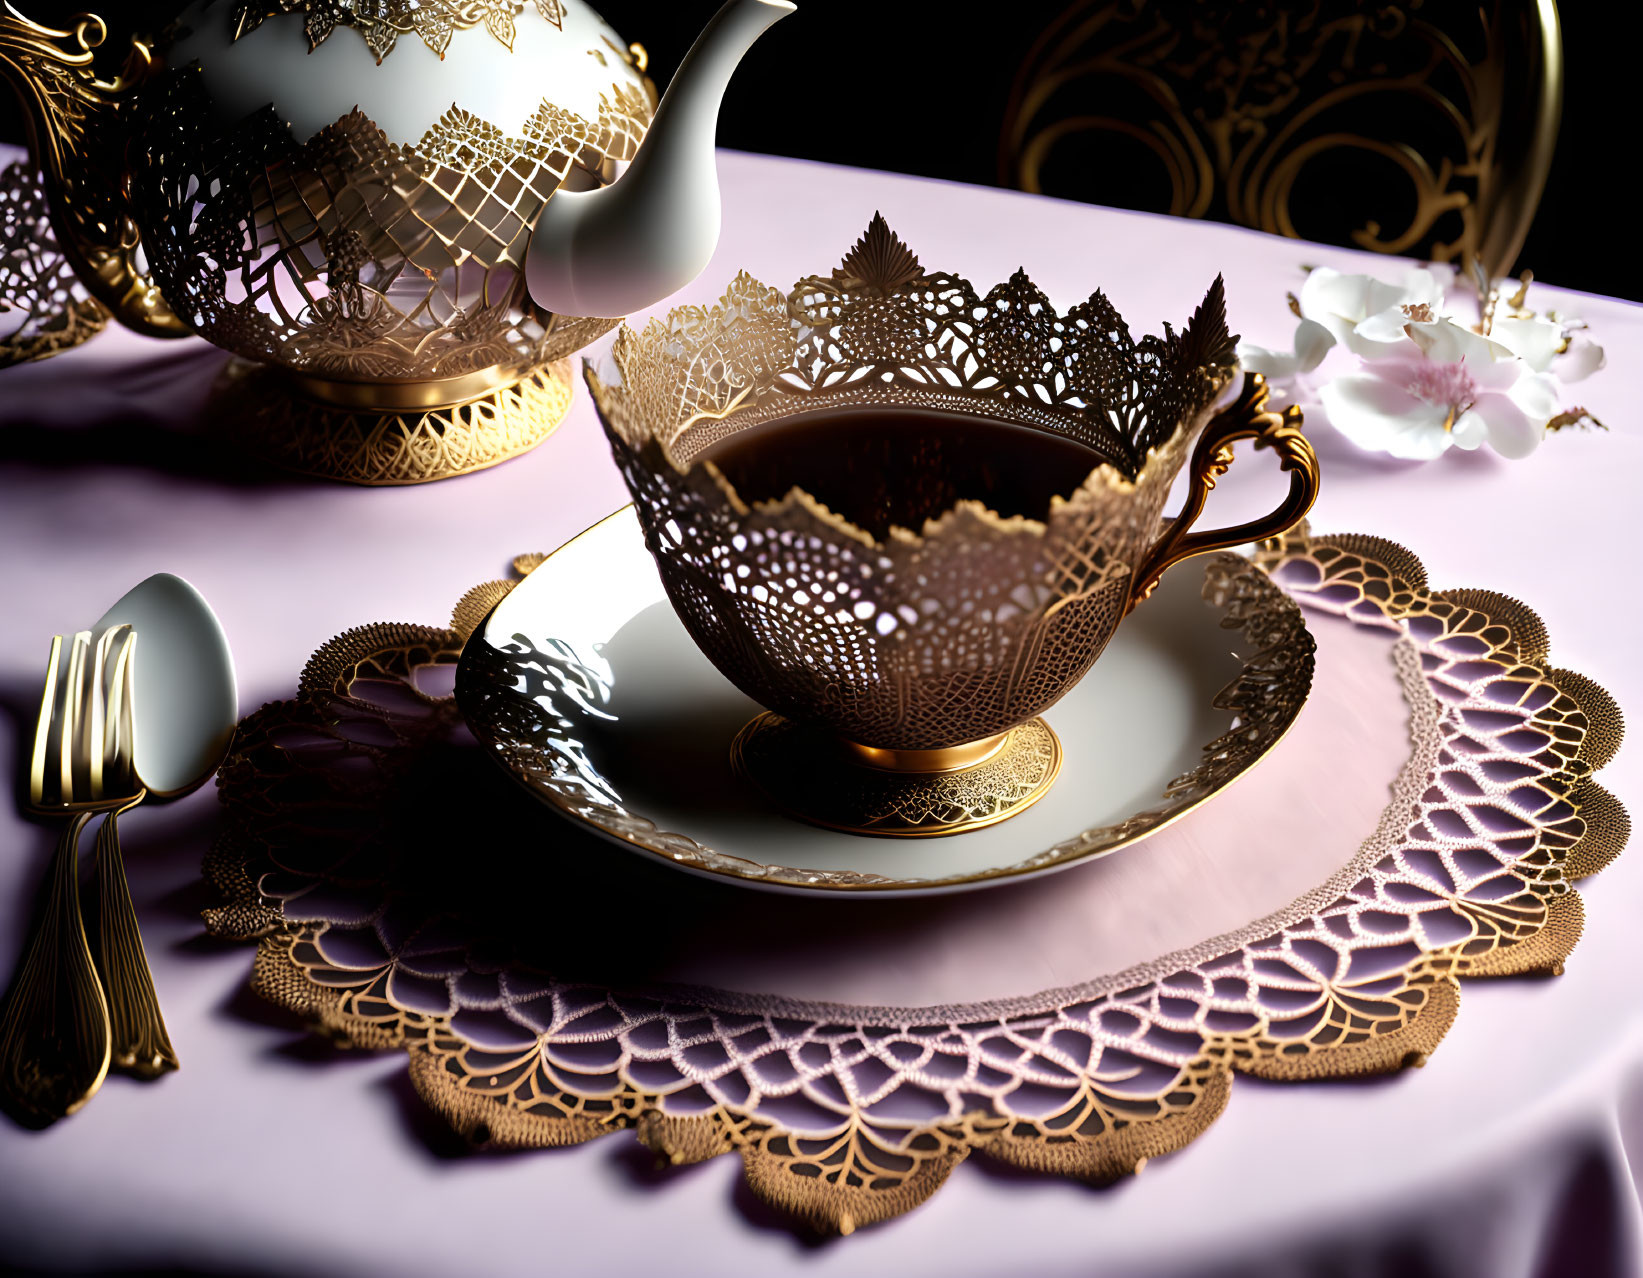 Filigree Design Tea Set with Gold Accents and Floral Teapot